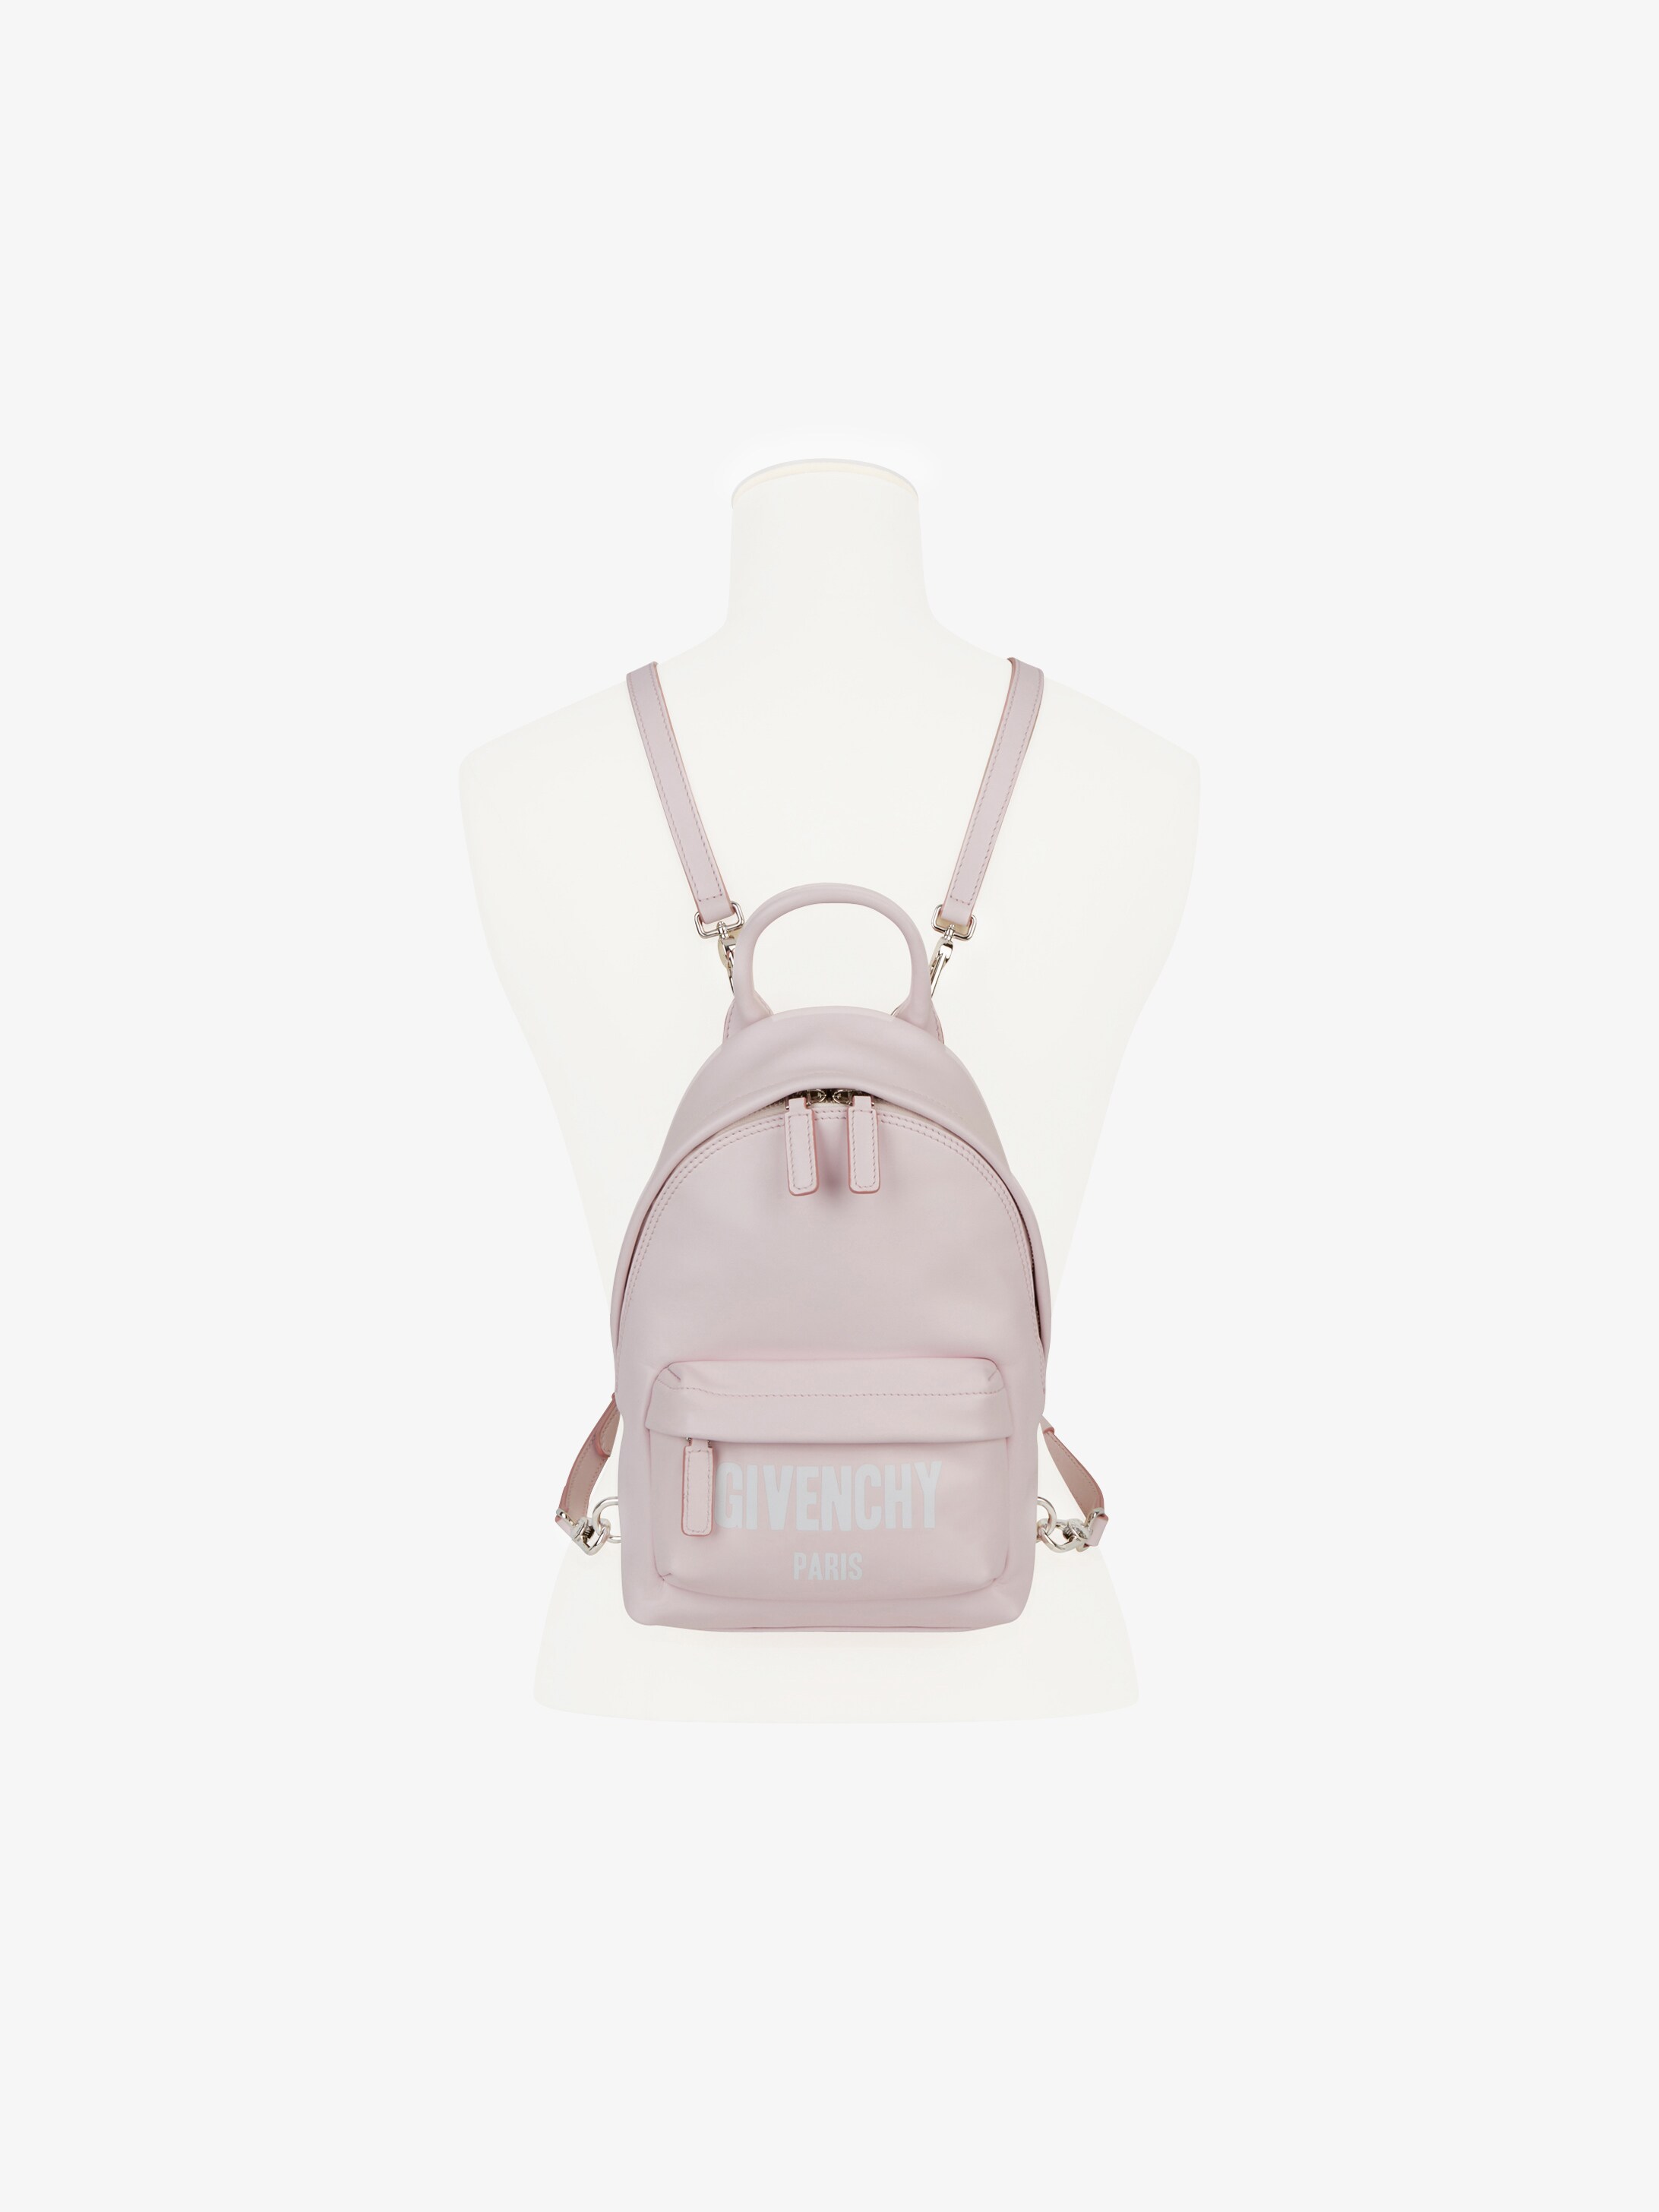 Nano leather backpack | GIVENCHY Paris